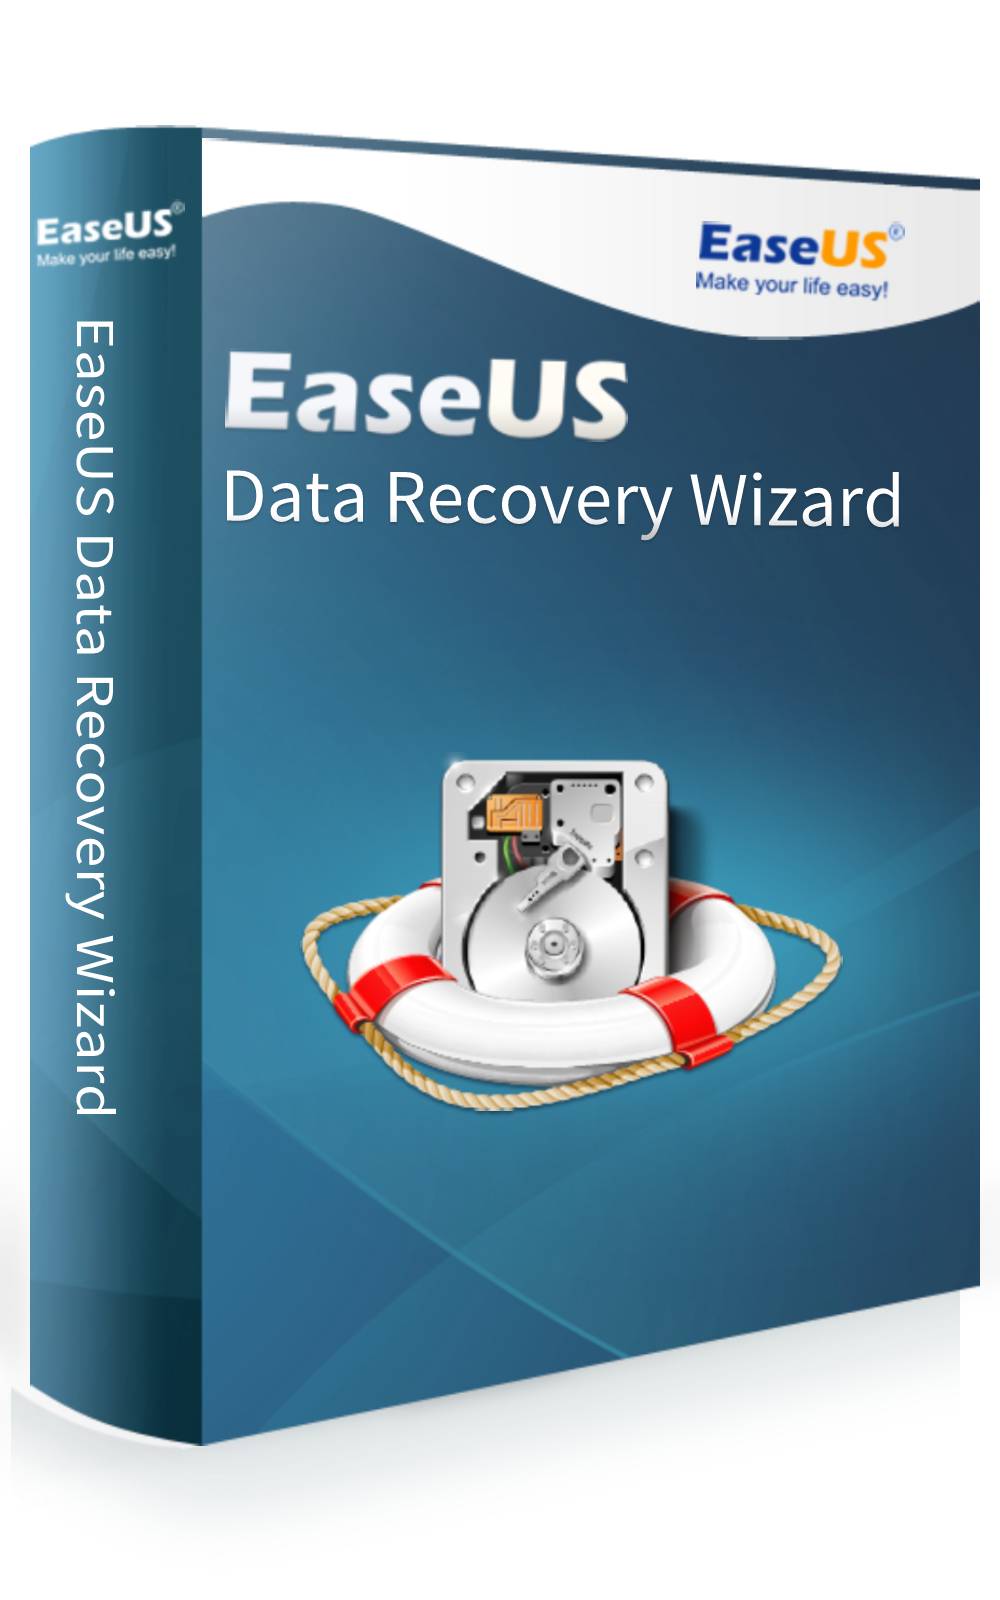 EaseUS Software EaseUS Data Recovery Wizard Professional (Monthly Subscription)